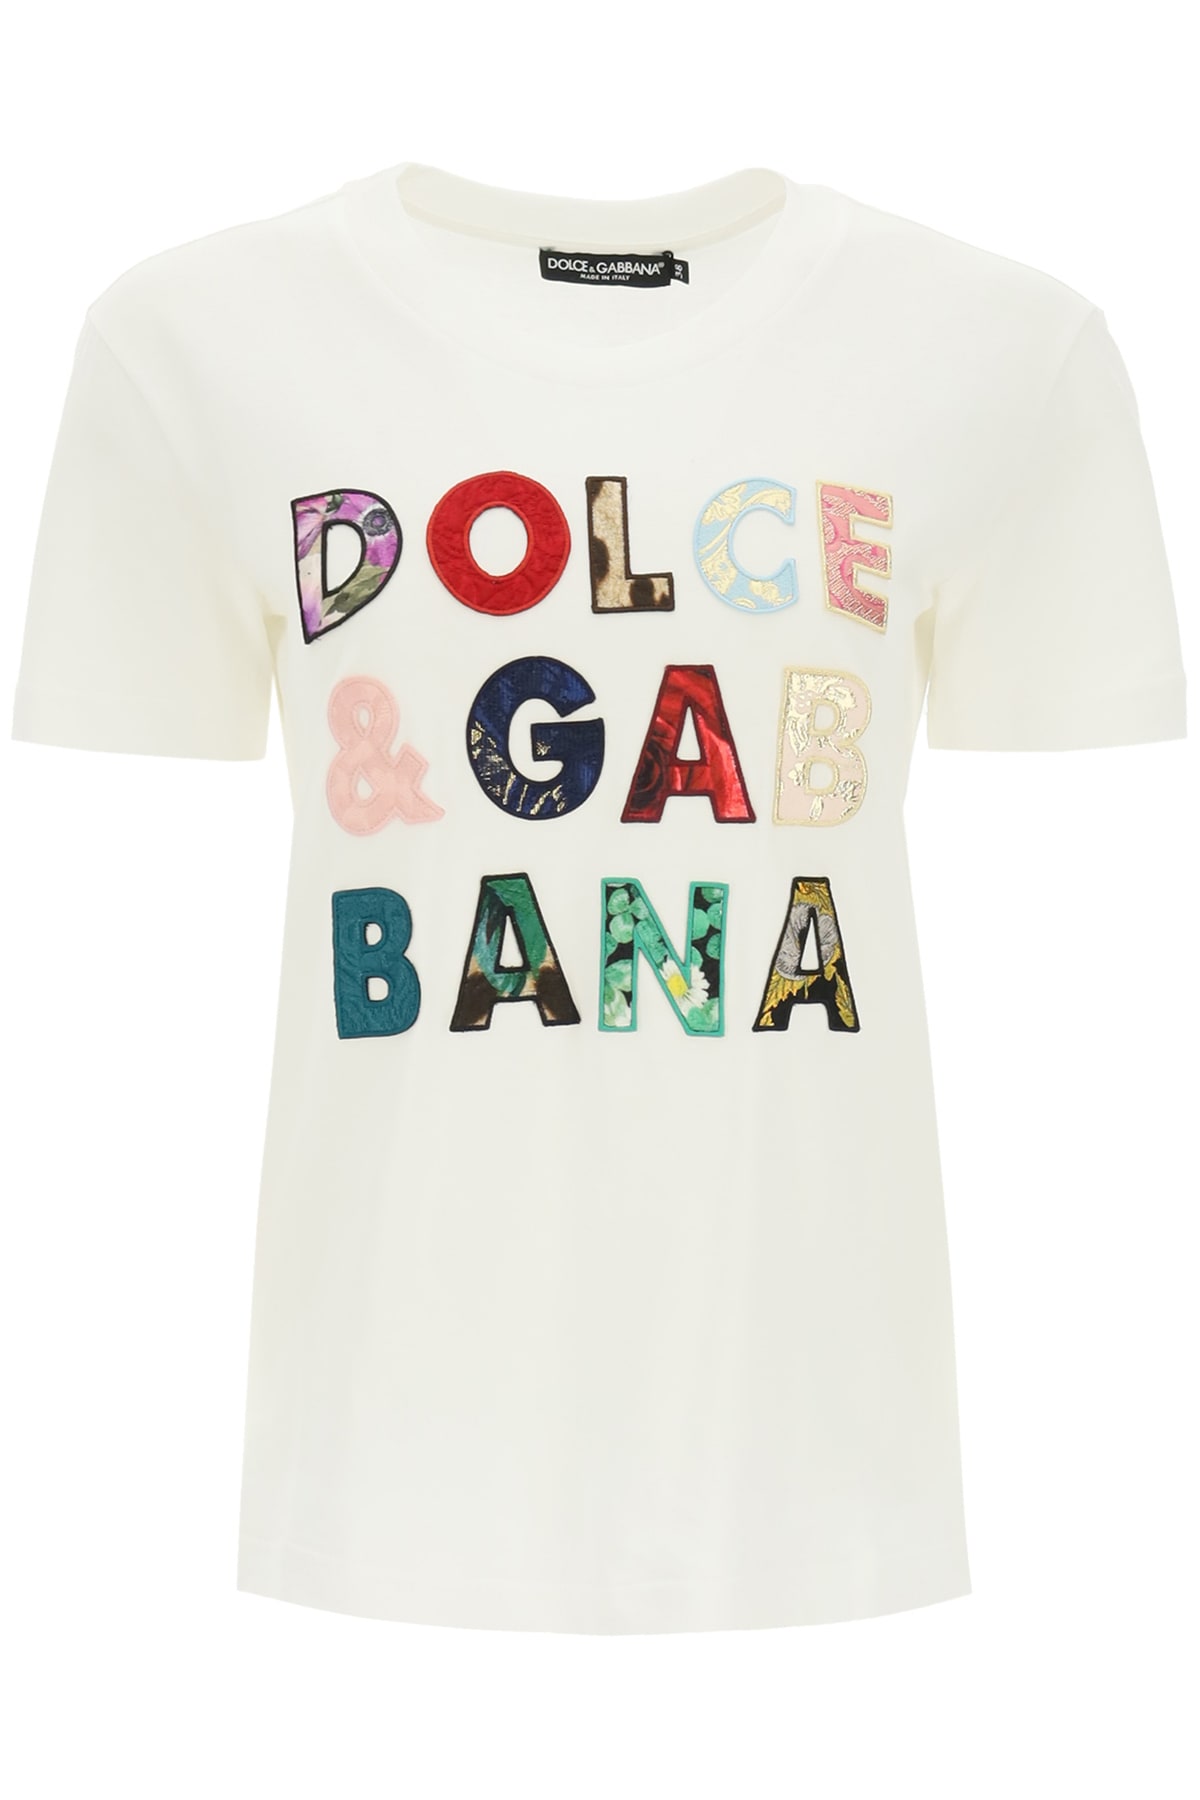 Dolce & Gabbana Patchwork Embroidery T-shirt